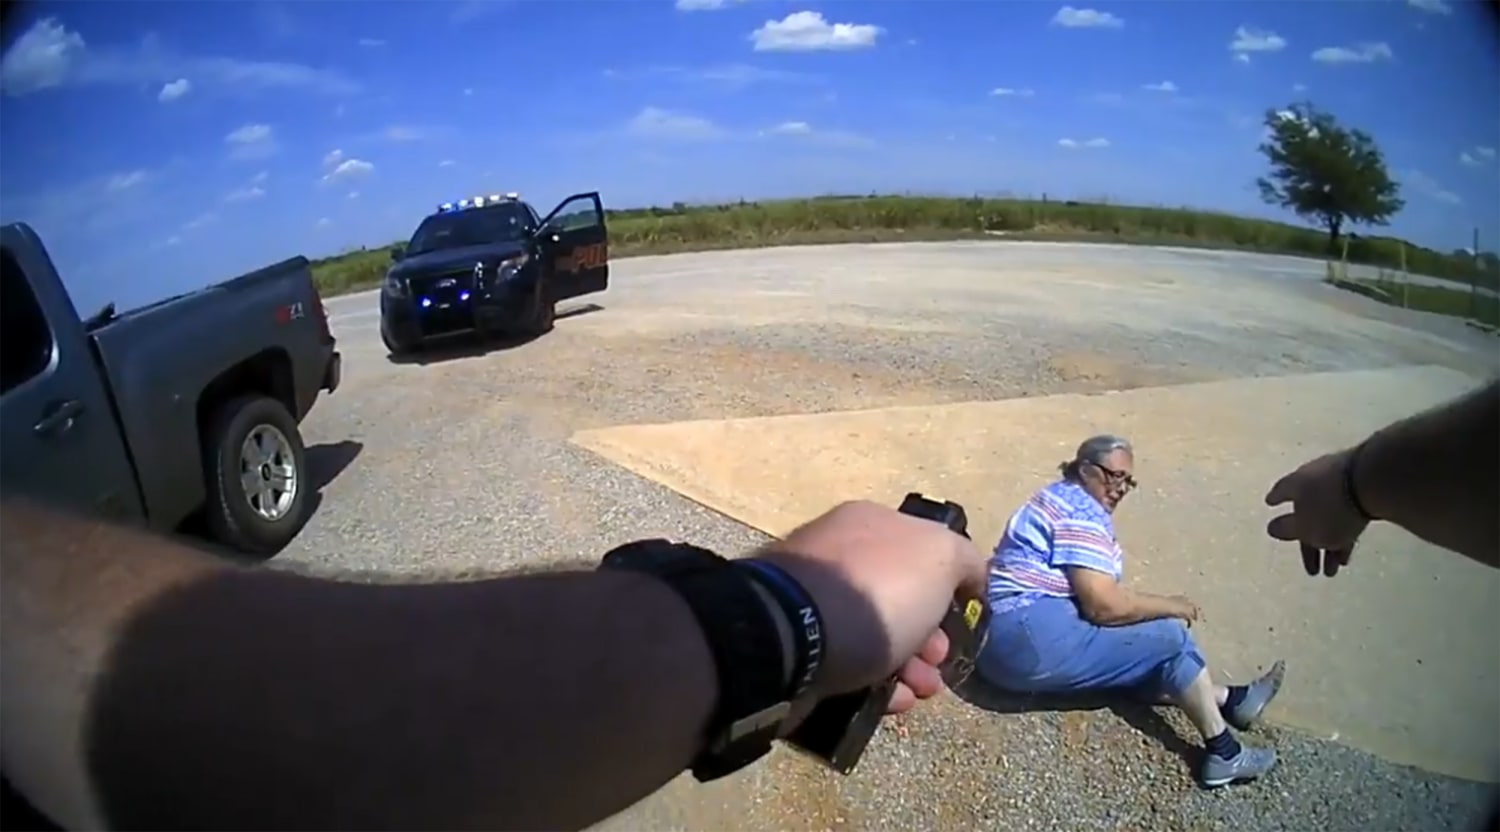 Watch video released of oklahoma cops repeatedly tasering